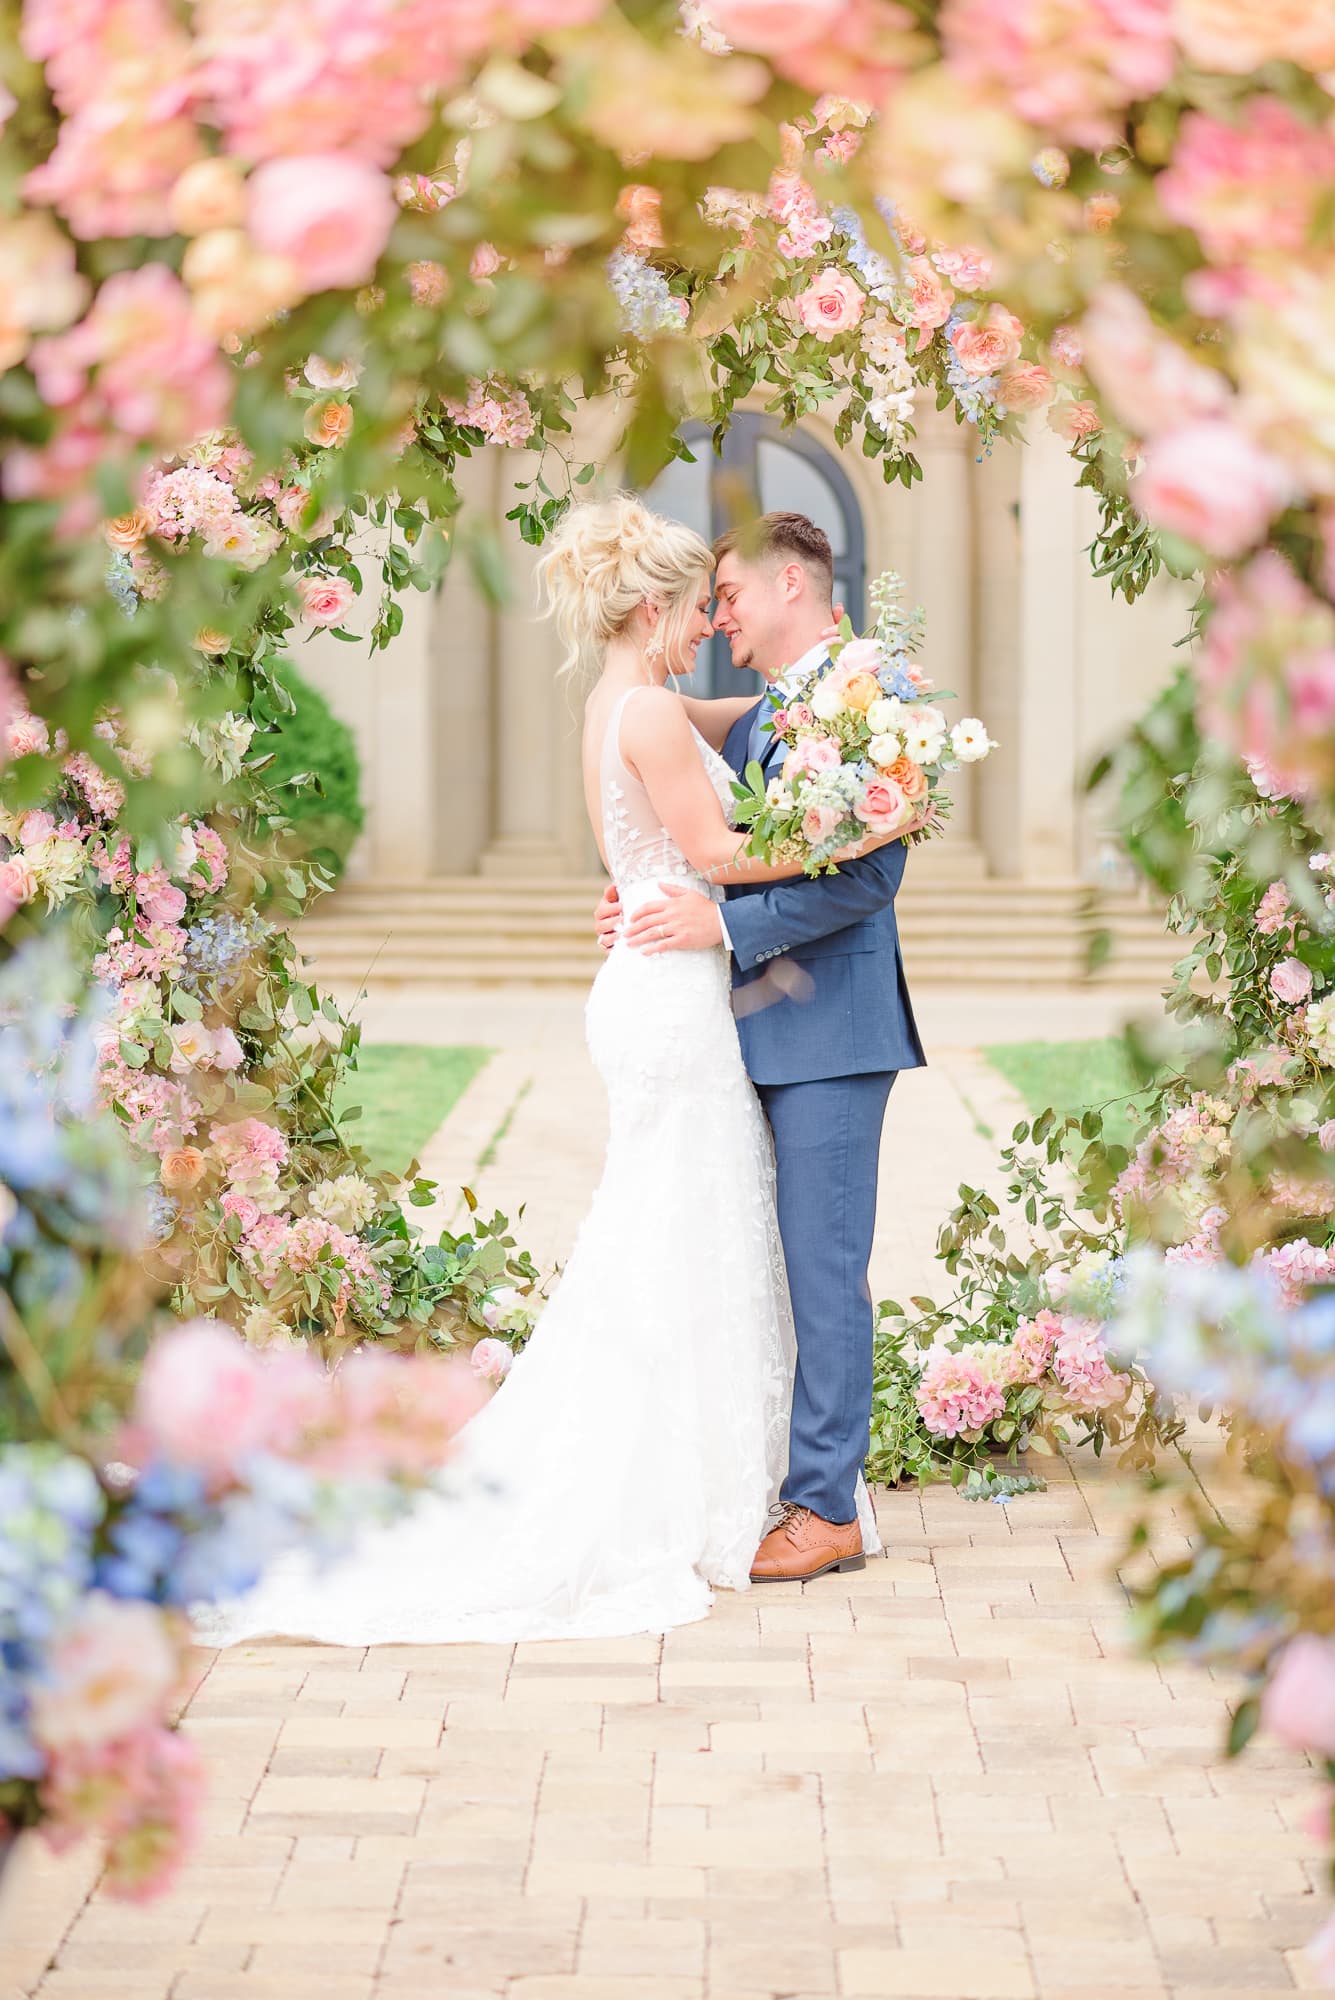 In this photograph, we see a double arch backdrop with flowers at this wedding in summer colors.